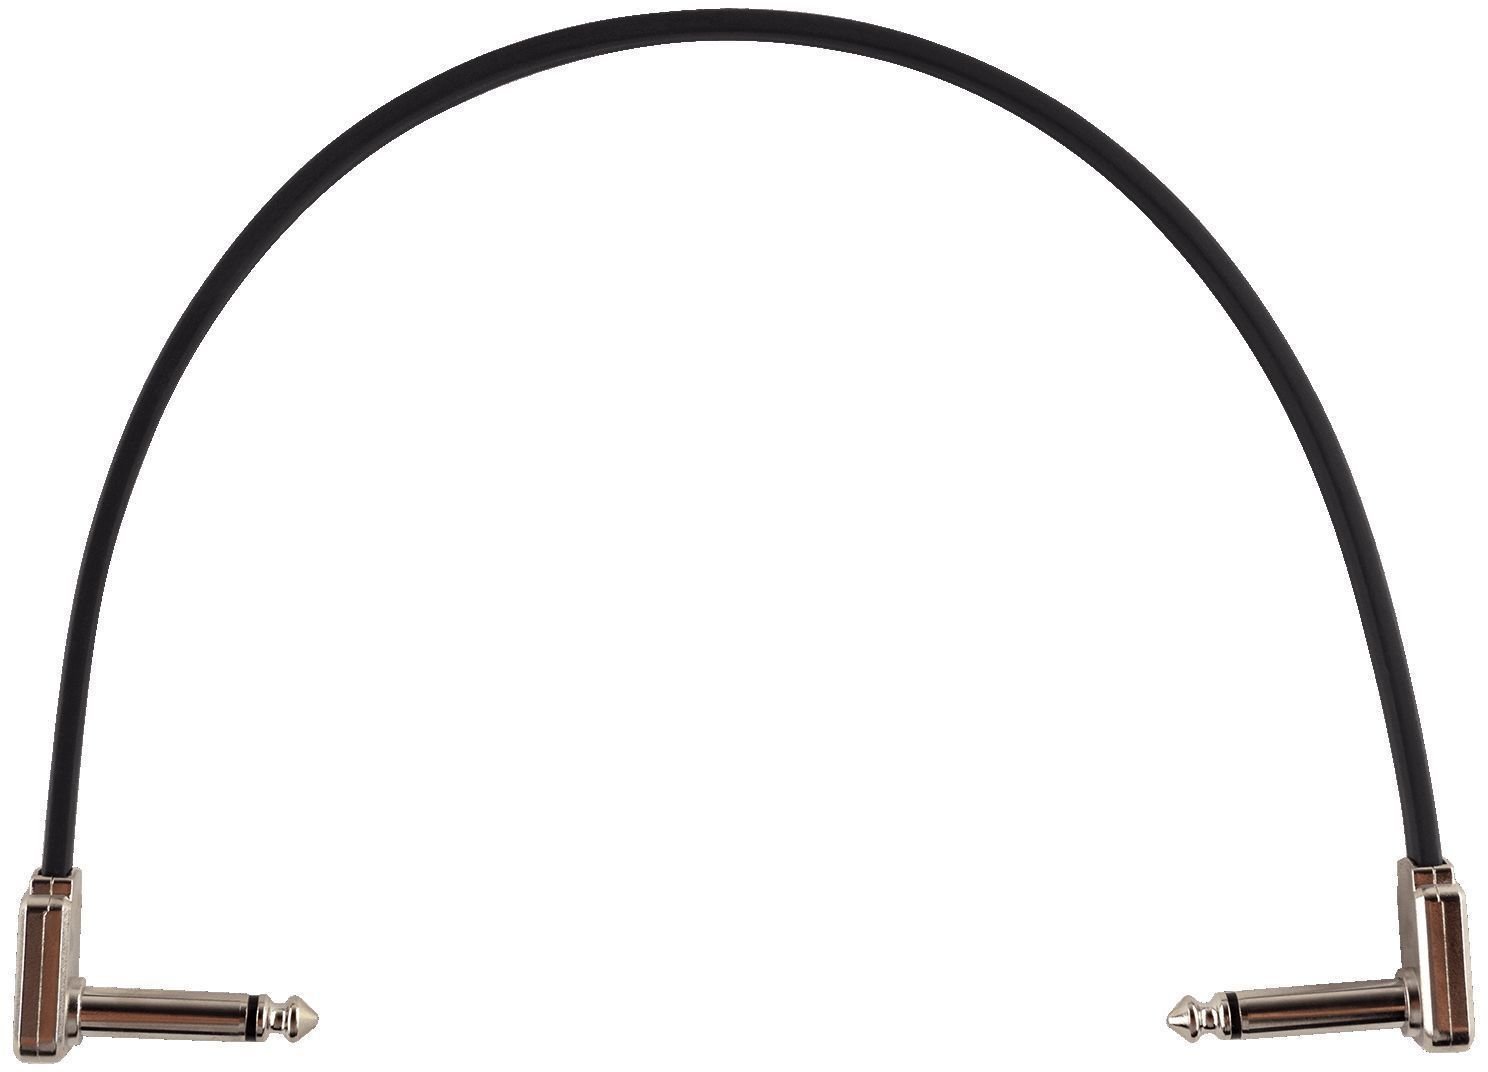 Adapter/Patch Cable Ernie Ball P06227 Black 30 cm Angled - Angled